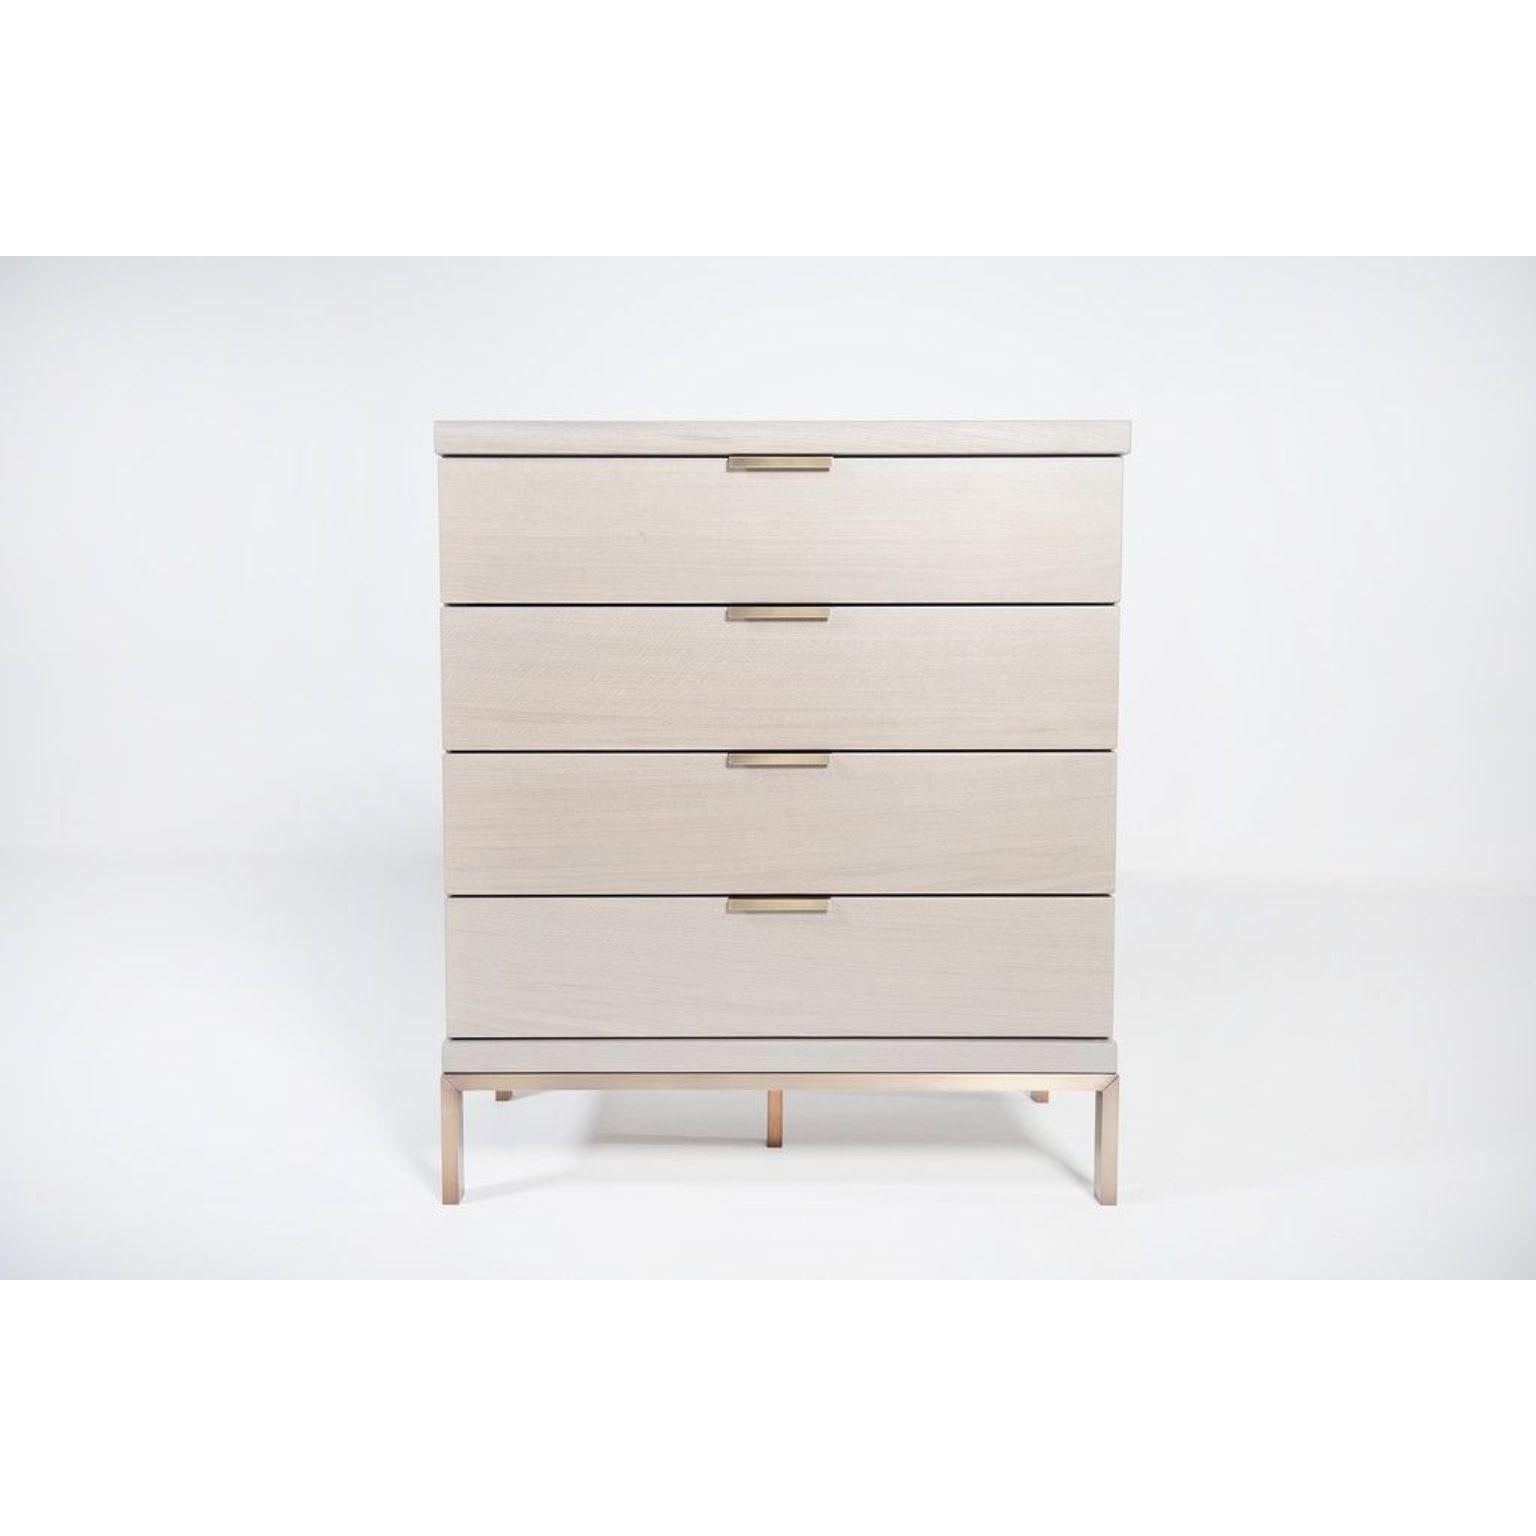 Nota Bene oak commode by Van Rossum
Dimensions: D81 x W49 x H92 cm
Materials: Oak, brass.

The wood is available in all standard Van Rossum colors, or in a matching finish to customer's own sample.
Detailing is available in stainless steel;